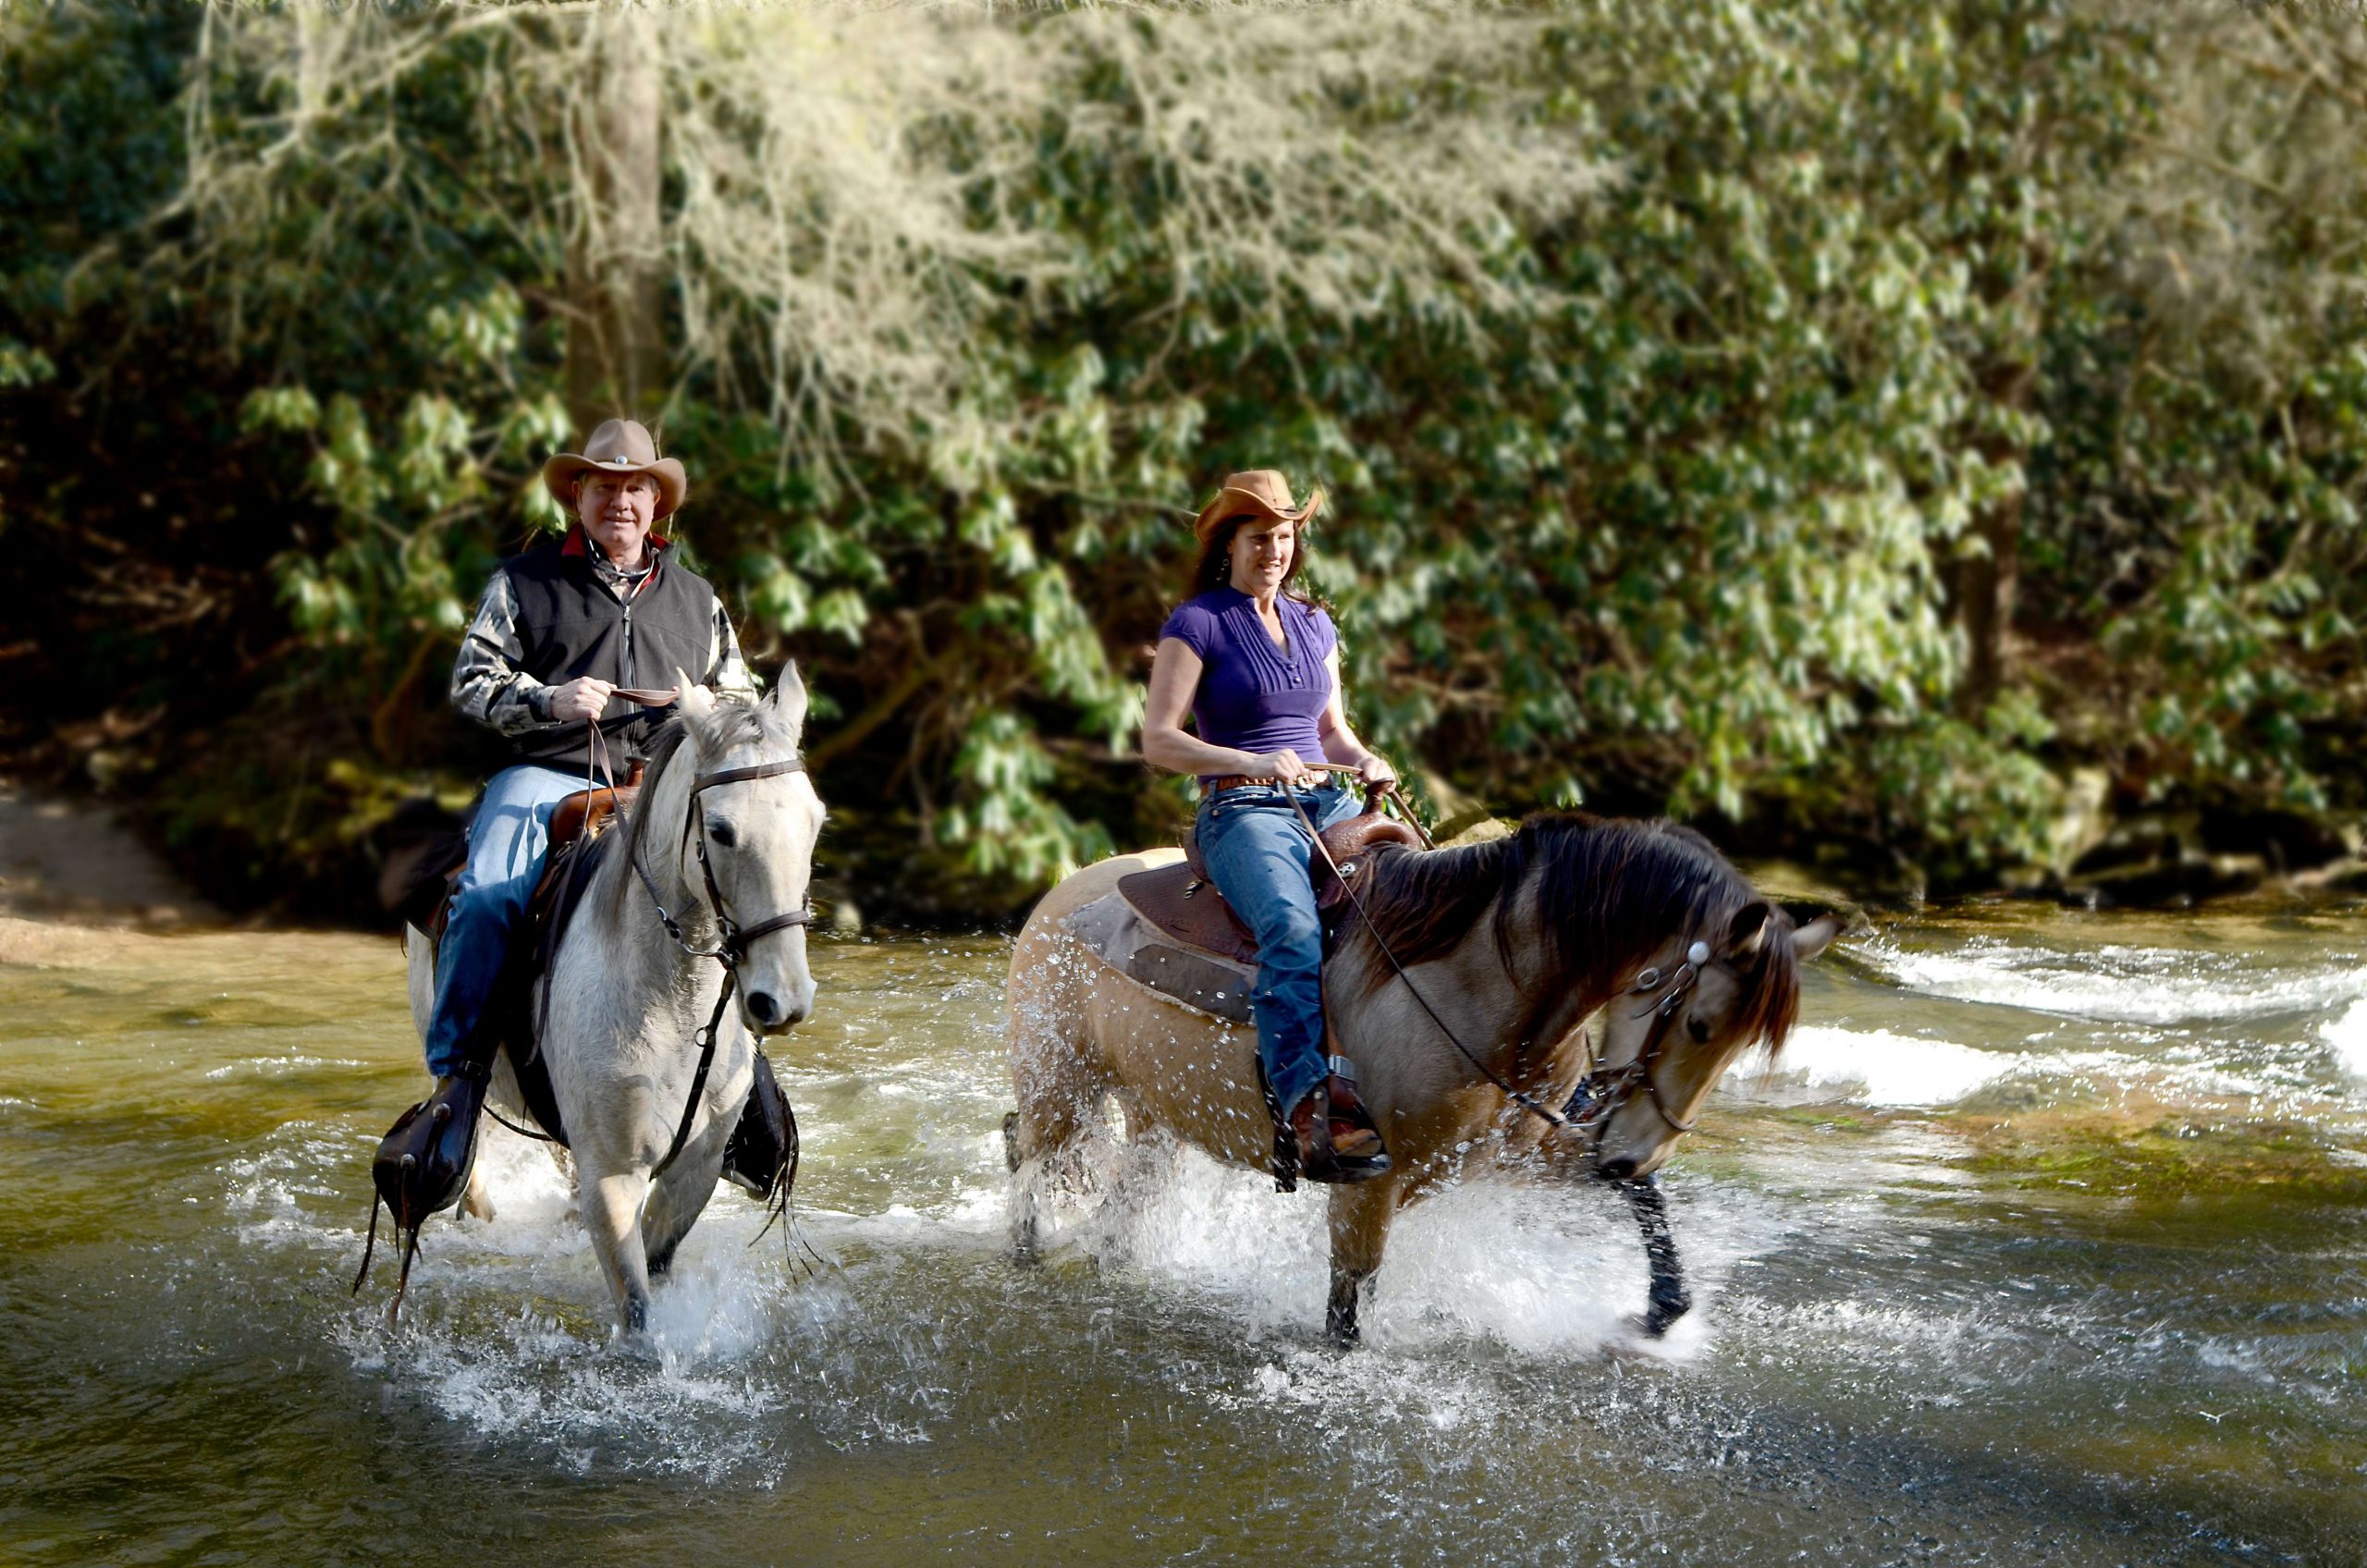 Another interesting option is enjoying the outdoors on a Horseback Waterfall Tour.